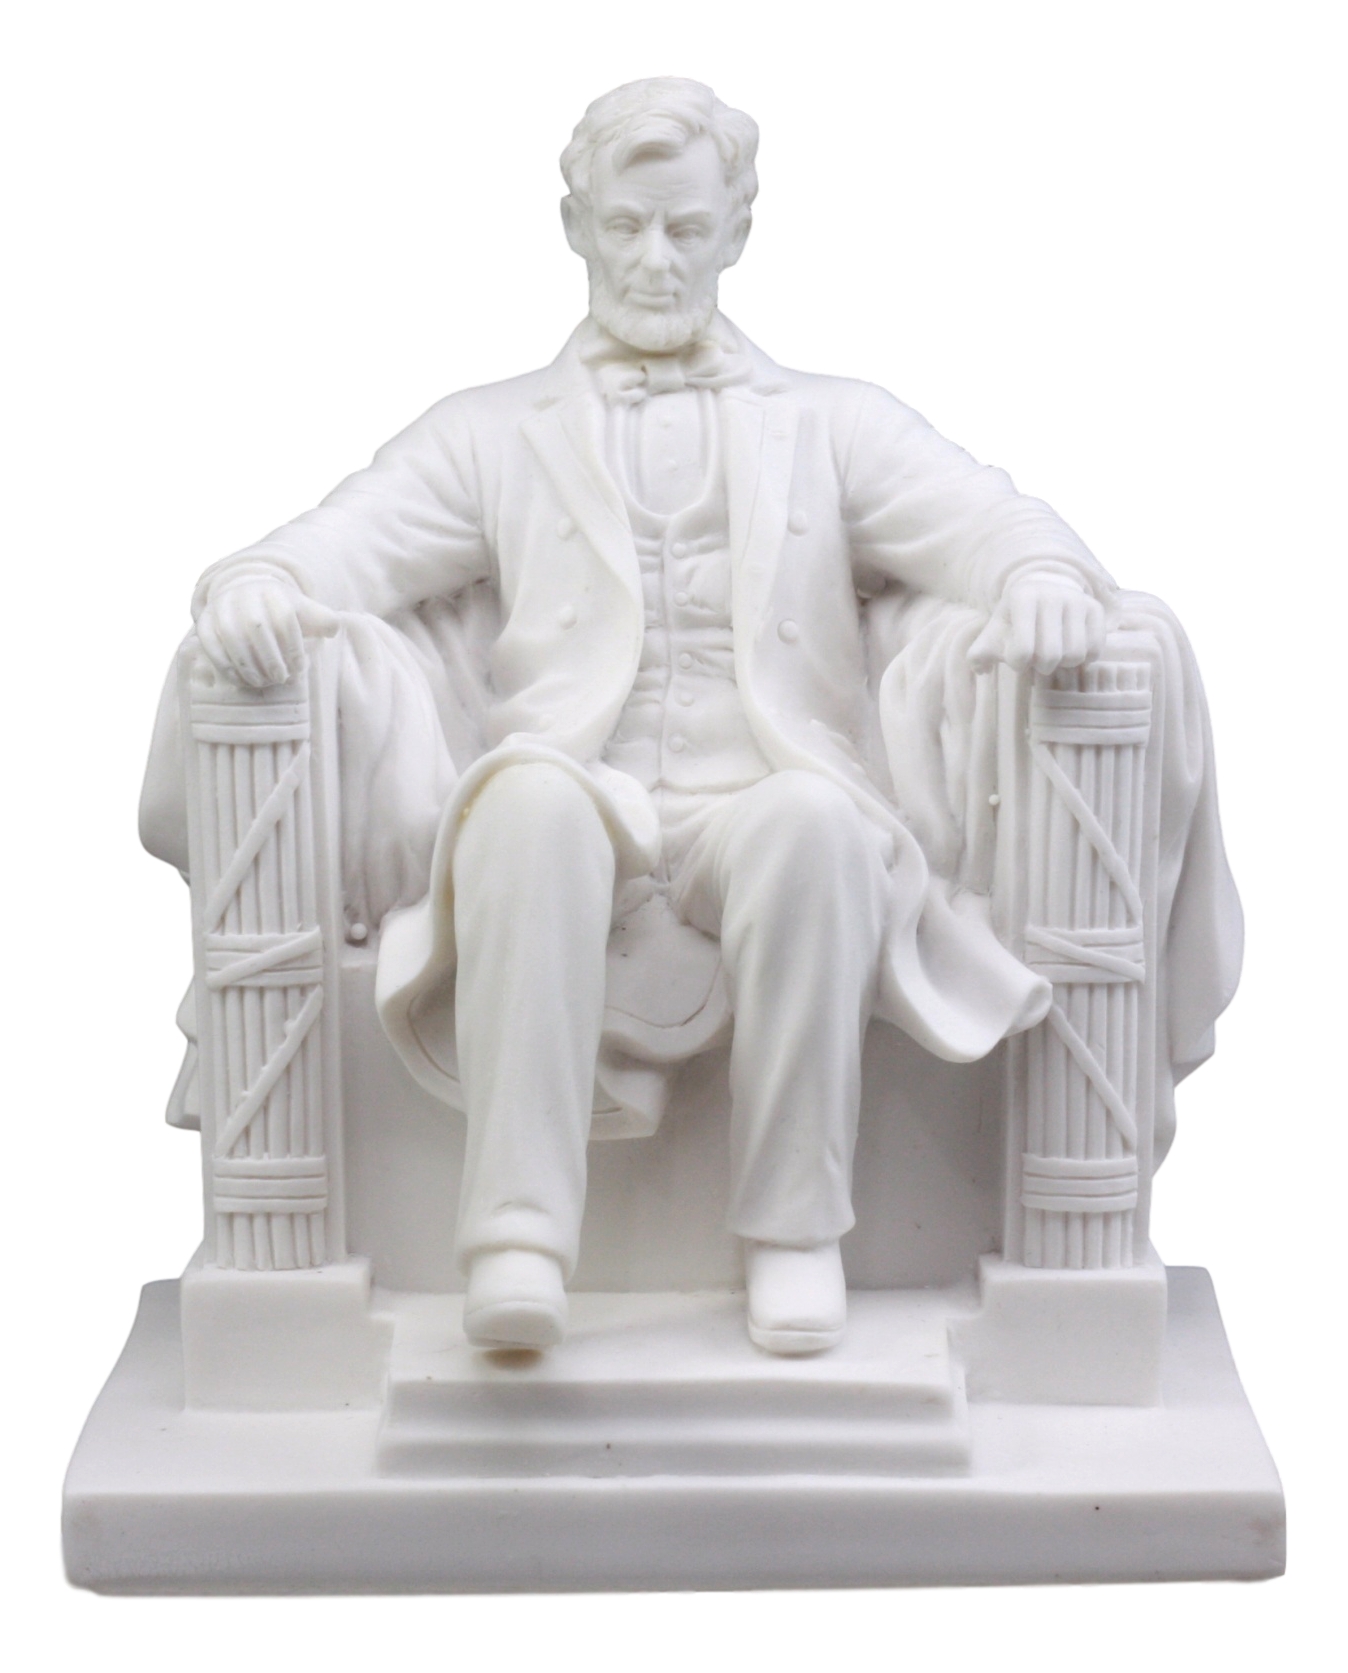 USA 16th President Abraham Lincoln Bust Statue 7.5 H Figurine Washington Decor Store for The Soul!!!